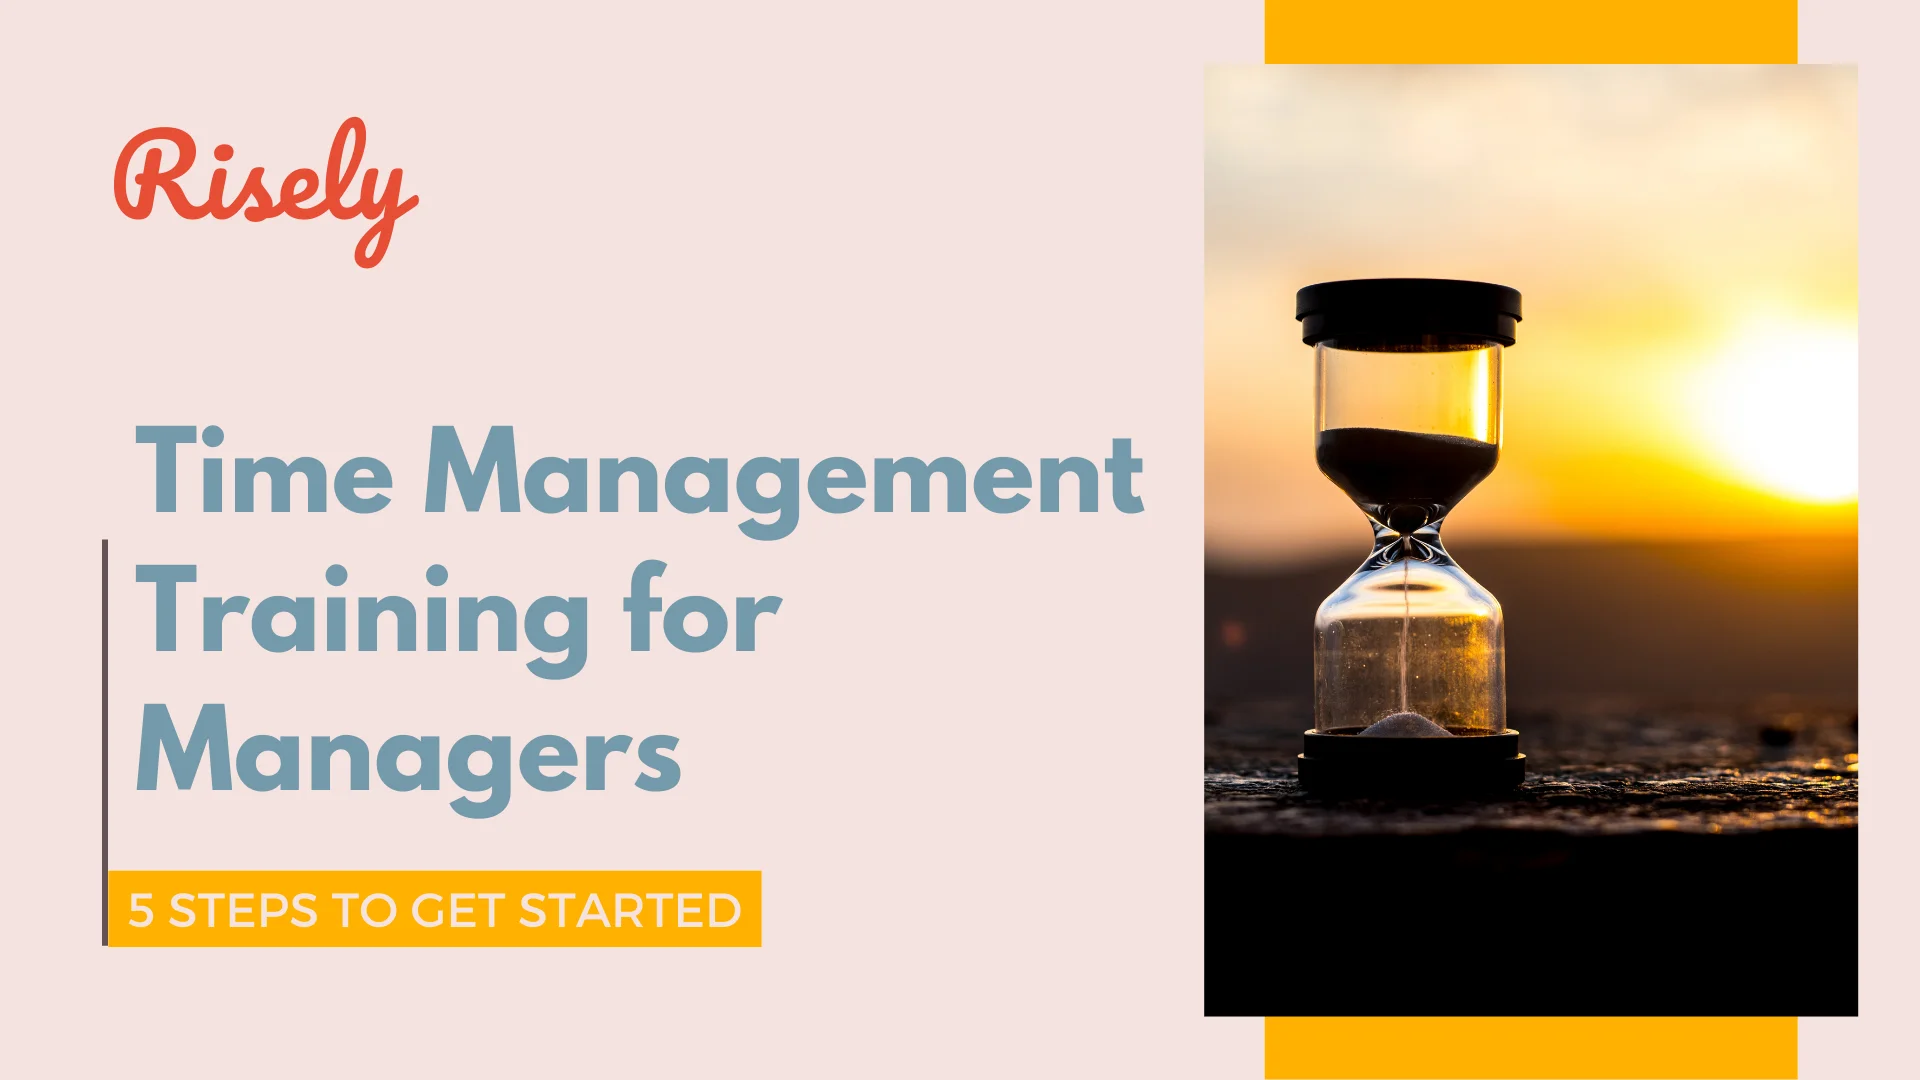 5 Steps to Time Management Training for Managers